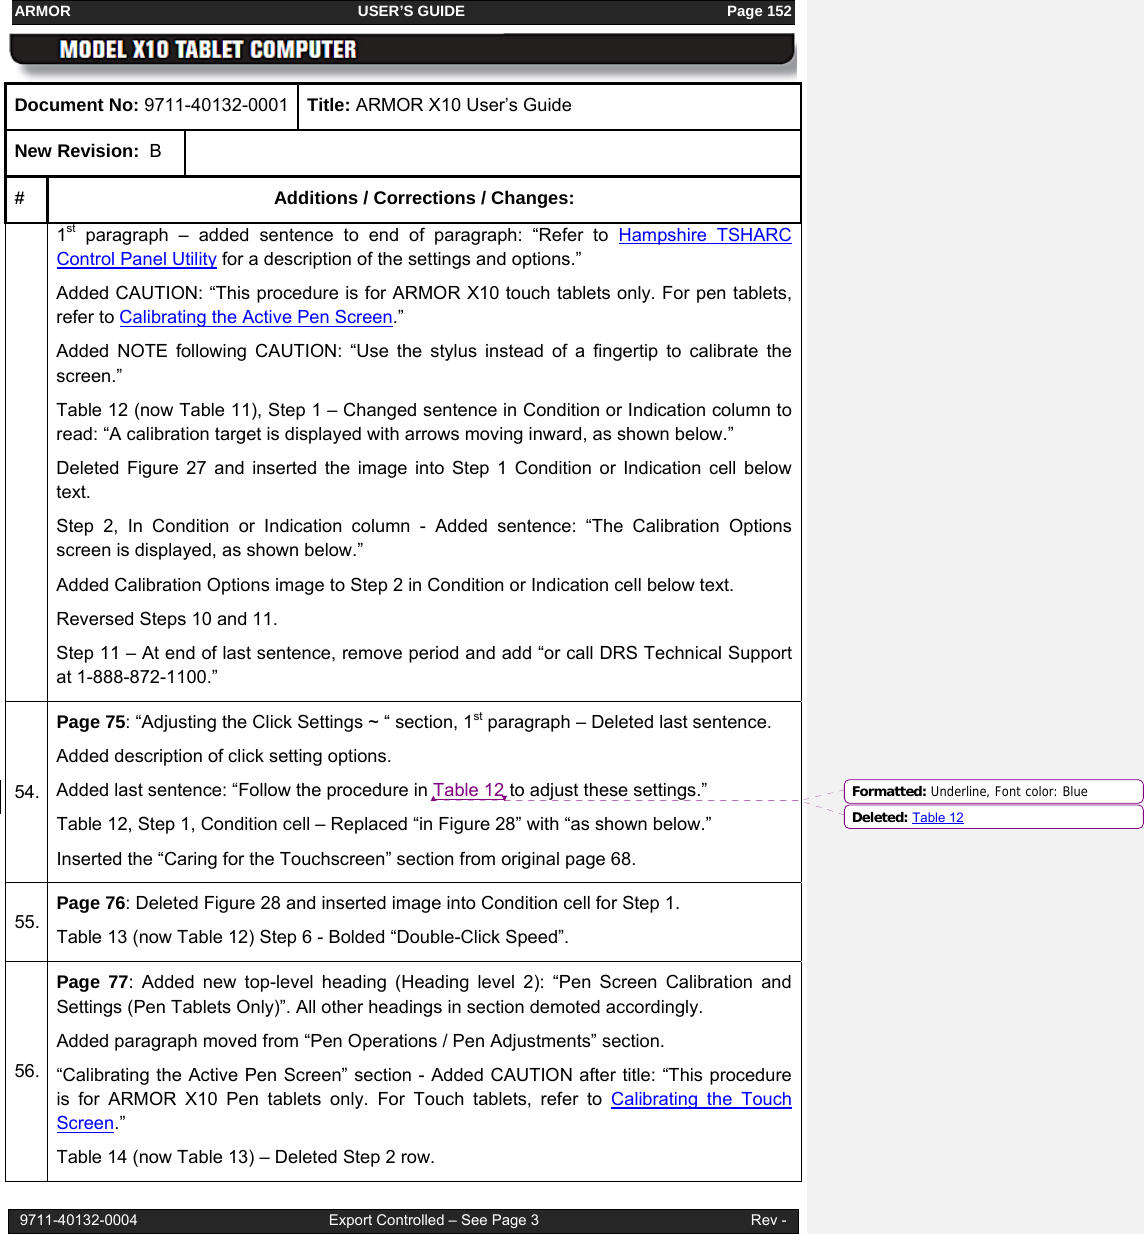 ARMOR                                                                     USER’S GUIDE                                                               Page 152  9711-40132-0004                                              Export Controlled – See Page 3                                                   Rev - Document No: 9711-40132-0001  Title: ARMOR X10 User’s Guide New Revision:  B  #  Additions / Corrections / Changes: 1st paragraph – added sentence to end of paragraph: “Refer to Hampshire TSHARC Control Panel Utility for a description of the settings and options.” Added CAUTION: “This procedure is for ARMOR X10 touch tablets only. For pen tablets, refer to Calibrating the Active Pen Screen.” Added NOTE following CAUTION: “Use the stylus instead of a fingertip to calibrate the screen.” Table 12 (now Table 11), Step 1 – Changed sentence in Condition or Indication column to read: “A calibration target is displayed with arrows moving inward, as shown below.” Deleted Figure 27 and inserted the image into Step 1 Condition or Indication cell below text.  Step 2, In Condition or Indication column - Added sentence: “The Calibration Options screen is displayed, as shown below.” Added Calibration Options image to Step 2 in Condition or Indication cell below text. Reversed Steps 10 and 11. Step 11 – At end of last sentence, remove period and add “or call DRS Technical Support at 1-888-872-1100.” 54. Page 75: “Adjusting the Click Settings ~ “ section, 1st paragraph – Deleted last sentence. Added description of click setting options. Added last sentence: “Follow the procedure in Table 12 to adjust these settings.” Table 12, Step 1, Condition cell – Replaced “in Figure 28” with “as shown below.” Inserted the “Caring for the Touchscreen” section from original page 68. 55. Page 76: Deleted Figure 28 and inserted image into Condition cell for Step 1. Table 13 (now Table 12) Step 6 - Bolded “Double-Click Speed”. 56. Page 77: Added new top-level heading (Heading level 2): “Pen Screen Calibration and Settings (Pen Tablets Only)”. All other headings in section demoted accordingly. Added paragraph moved from “Pen Operations / Pen Adjustments” section. “Calibrating the Active Pen Screen” section - Added CAUTION after title: “This procedure is for ARMOR X10 Pen tablets only. For Touch tablets, refer to Calibrating the Touch Screen.” Table 14 (now Table 13) – Deleted Step 2 row. Formatted: Underline, Font color: BlueDeleted: Table 12